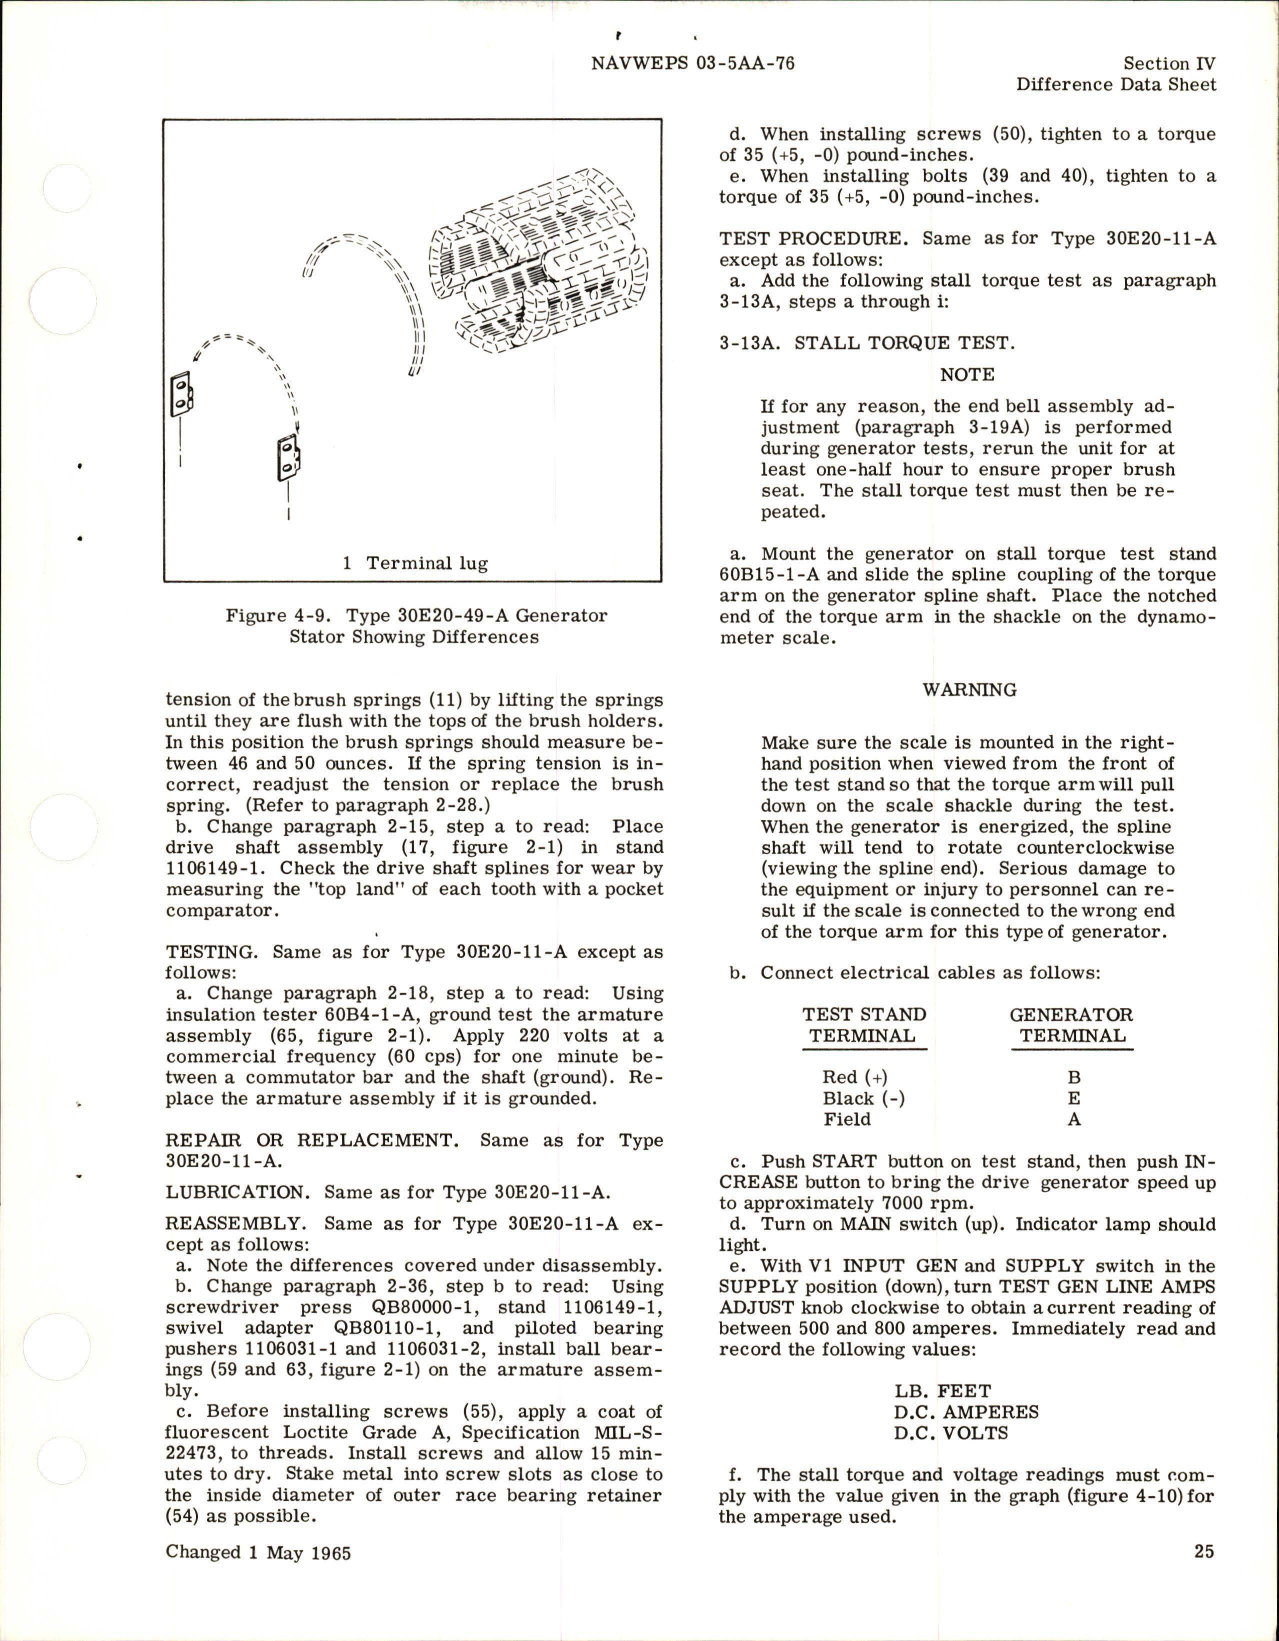 Sample page 7 from AirCorps Library document: Overhaul Instructions for Direct Current Generator - Type 30E20-5-B, 30E20-11-A, 30E20-11-B, and 30E20-49-A